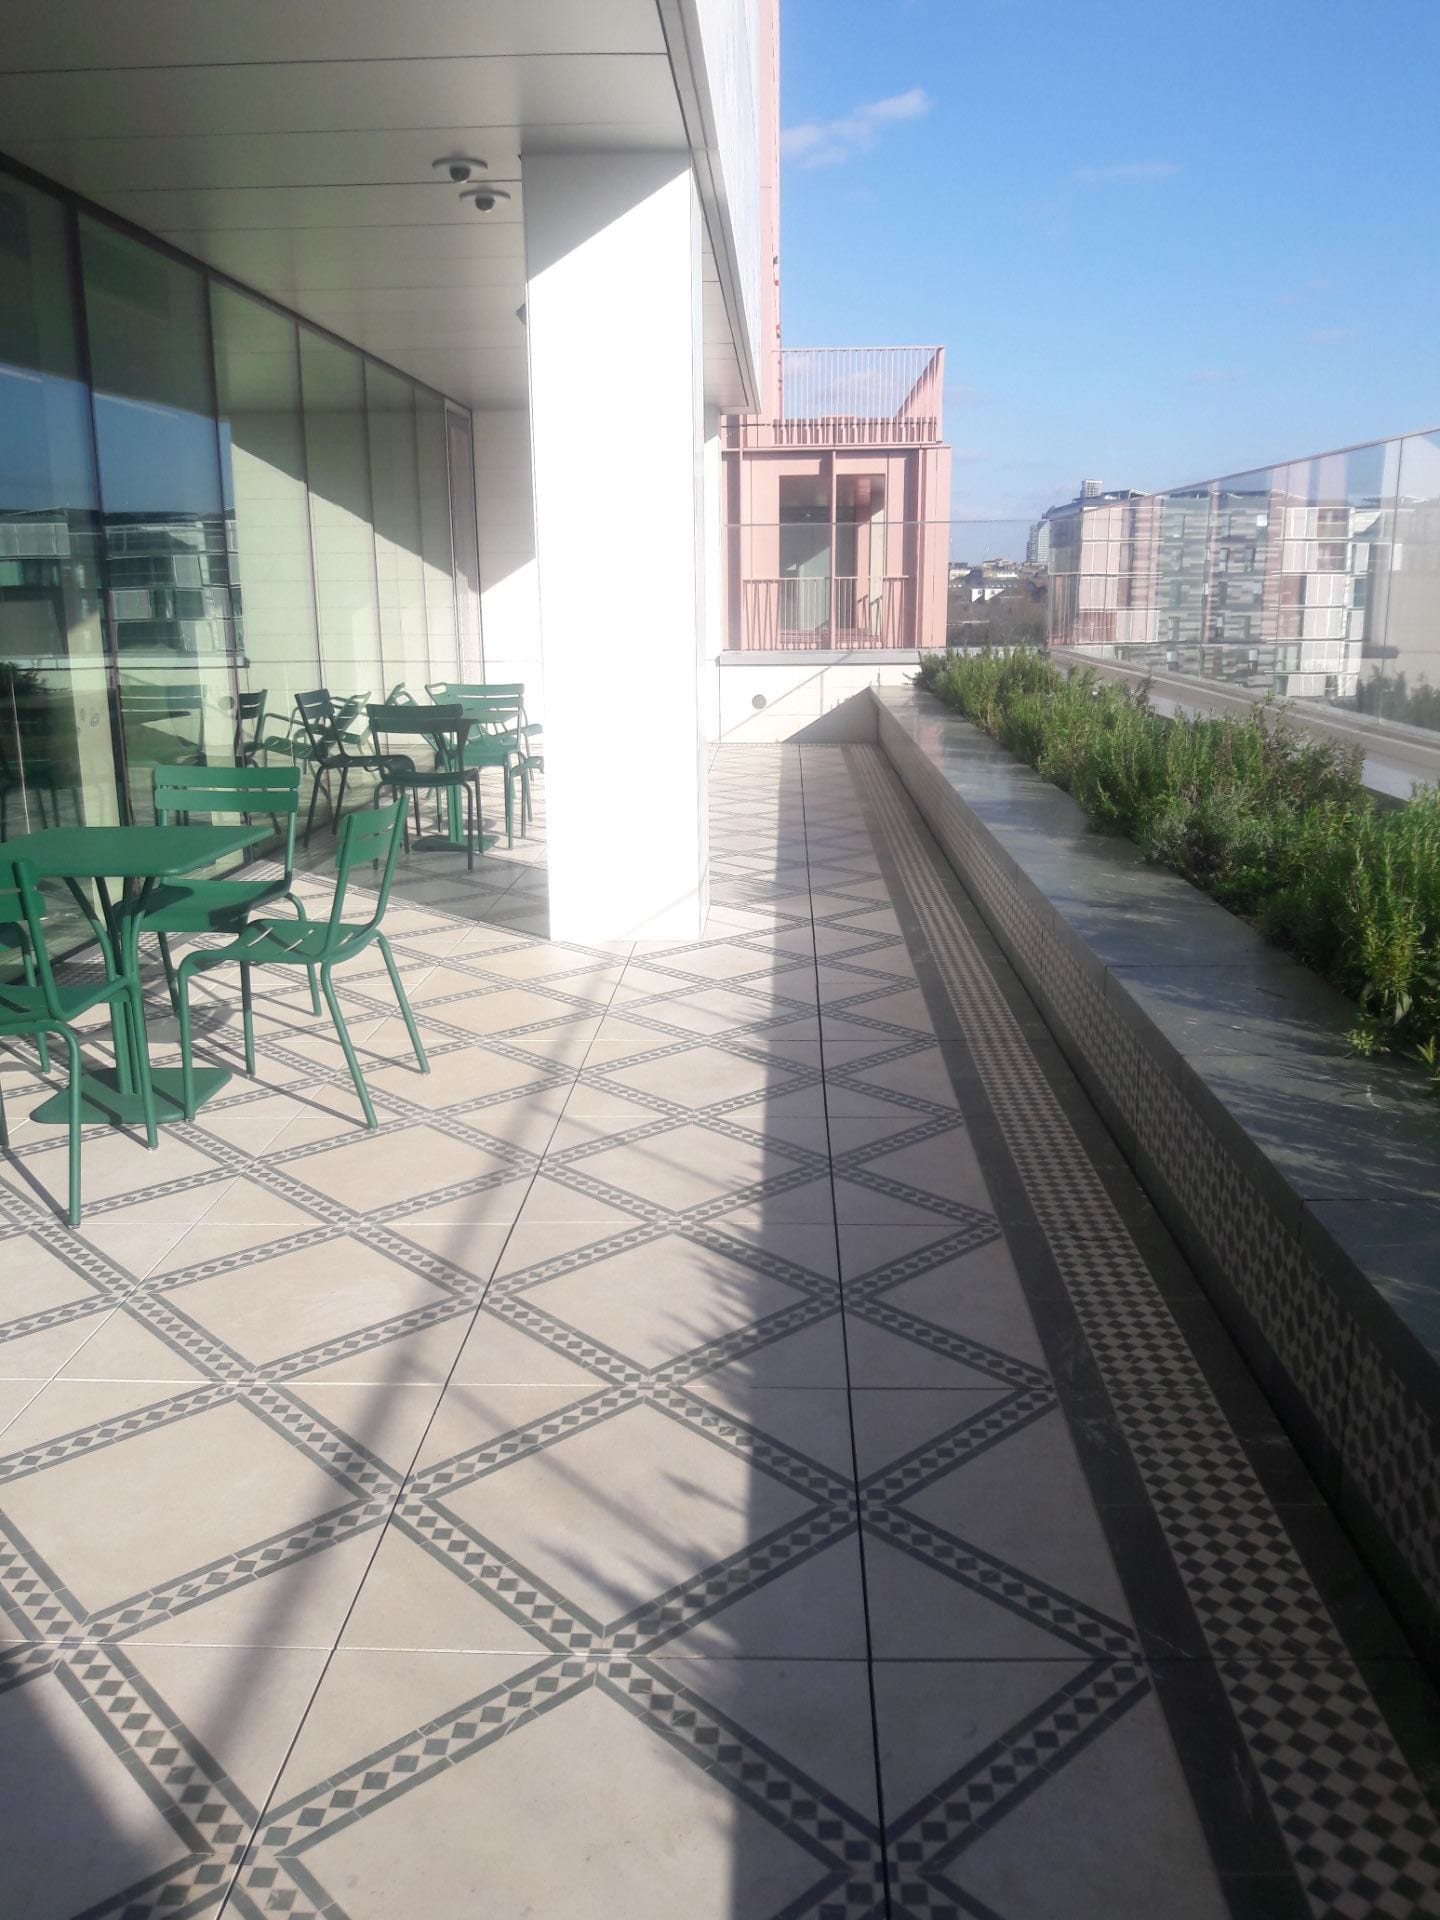 The Terrace of learning, a semi covered terrace in the sunlight. Floor tiles with geometric pattern in the North African style. Green garden tables and chairs sit close to the full length windows. Green evergreen herbs can be seen in the planter.